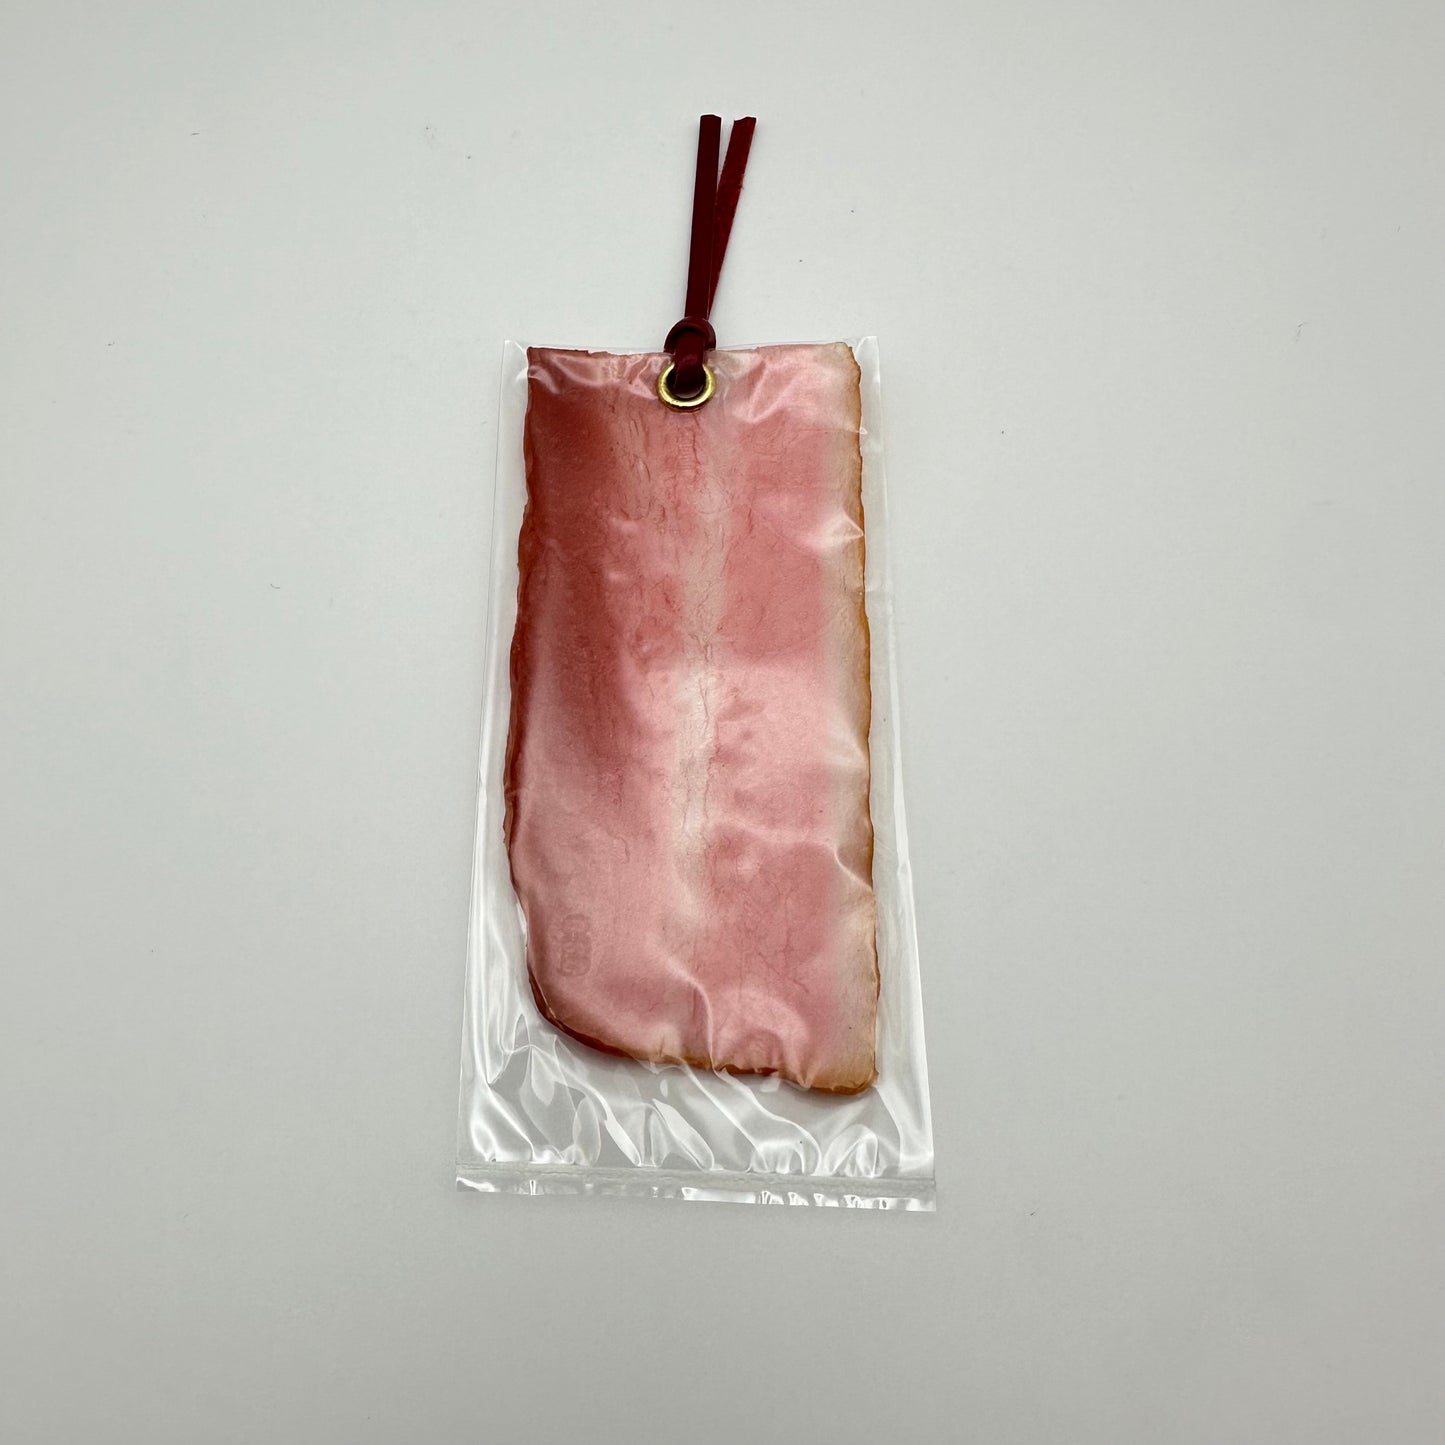 Bookmark made to look like real bacon. Complete with gromit and leather strap.